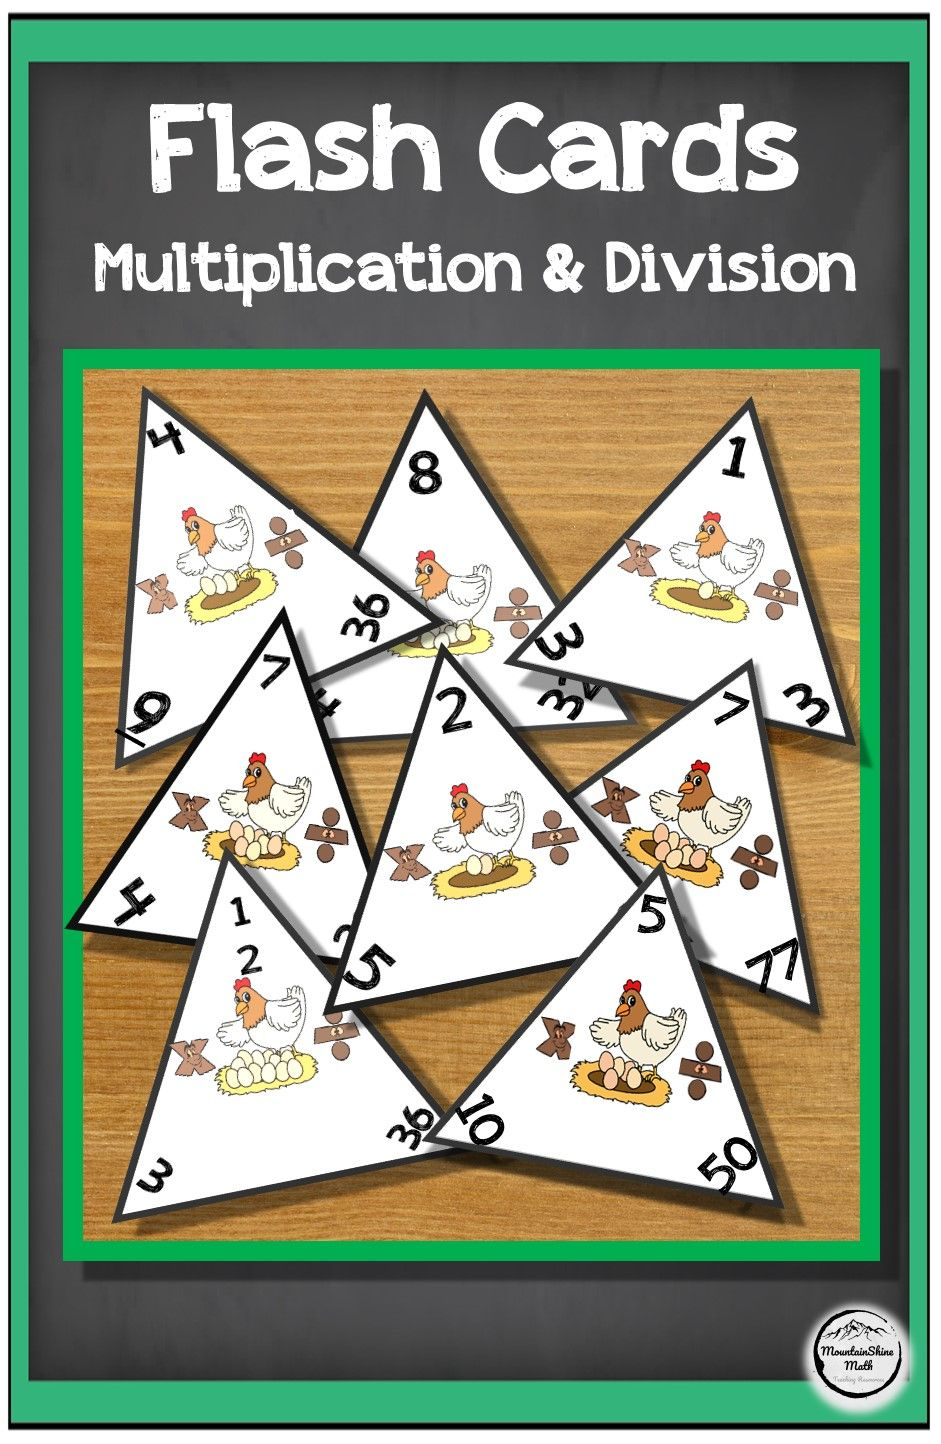 Multiplication And Division Triangle Flashcards 1-12